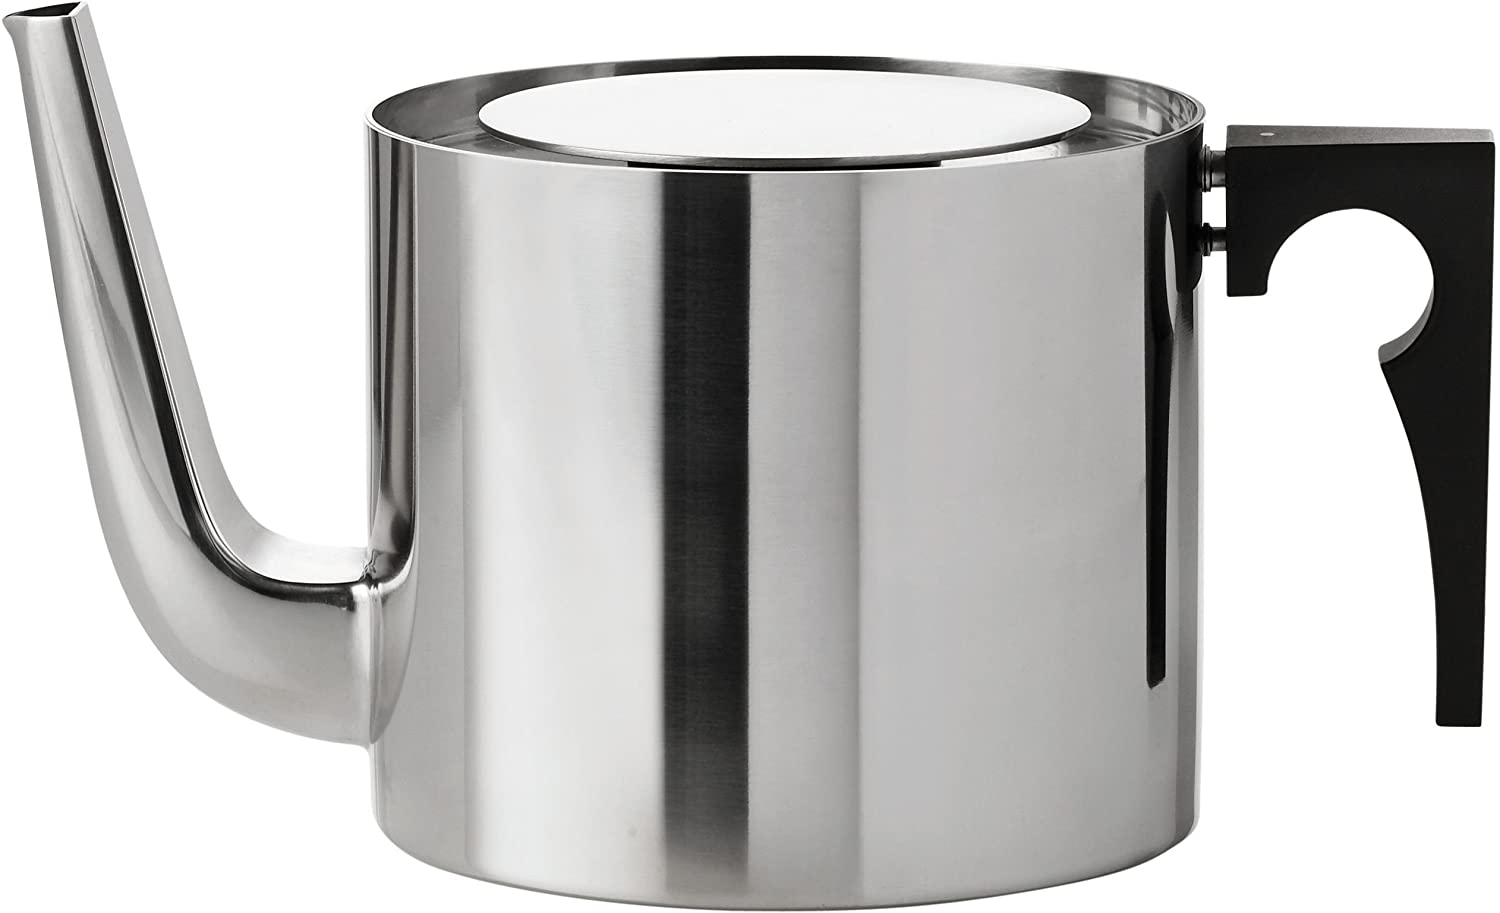 Stelton stainless steel teapot, designed by Arne Jacobsen in the Cylinda-Line, 1.25l